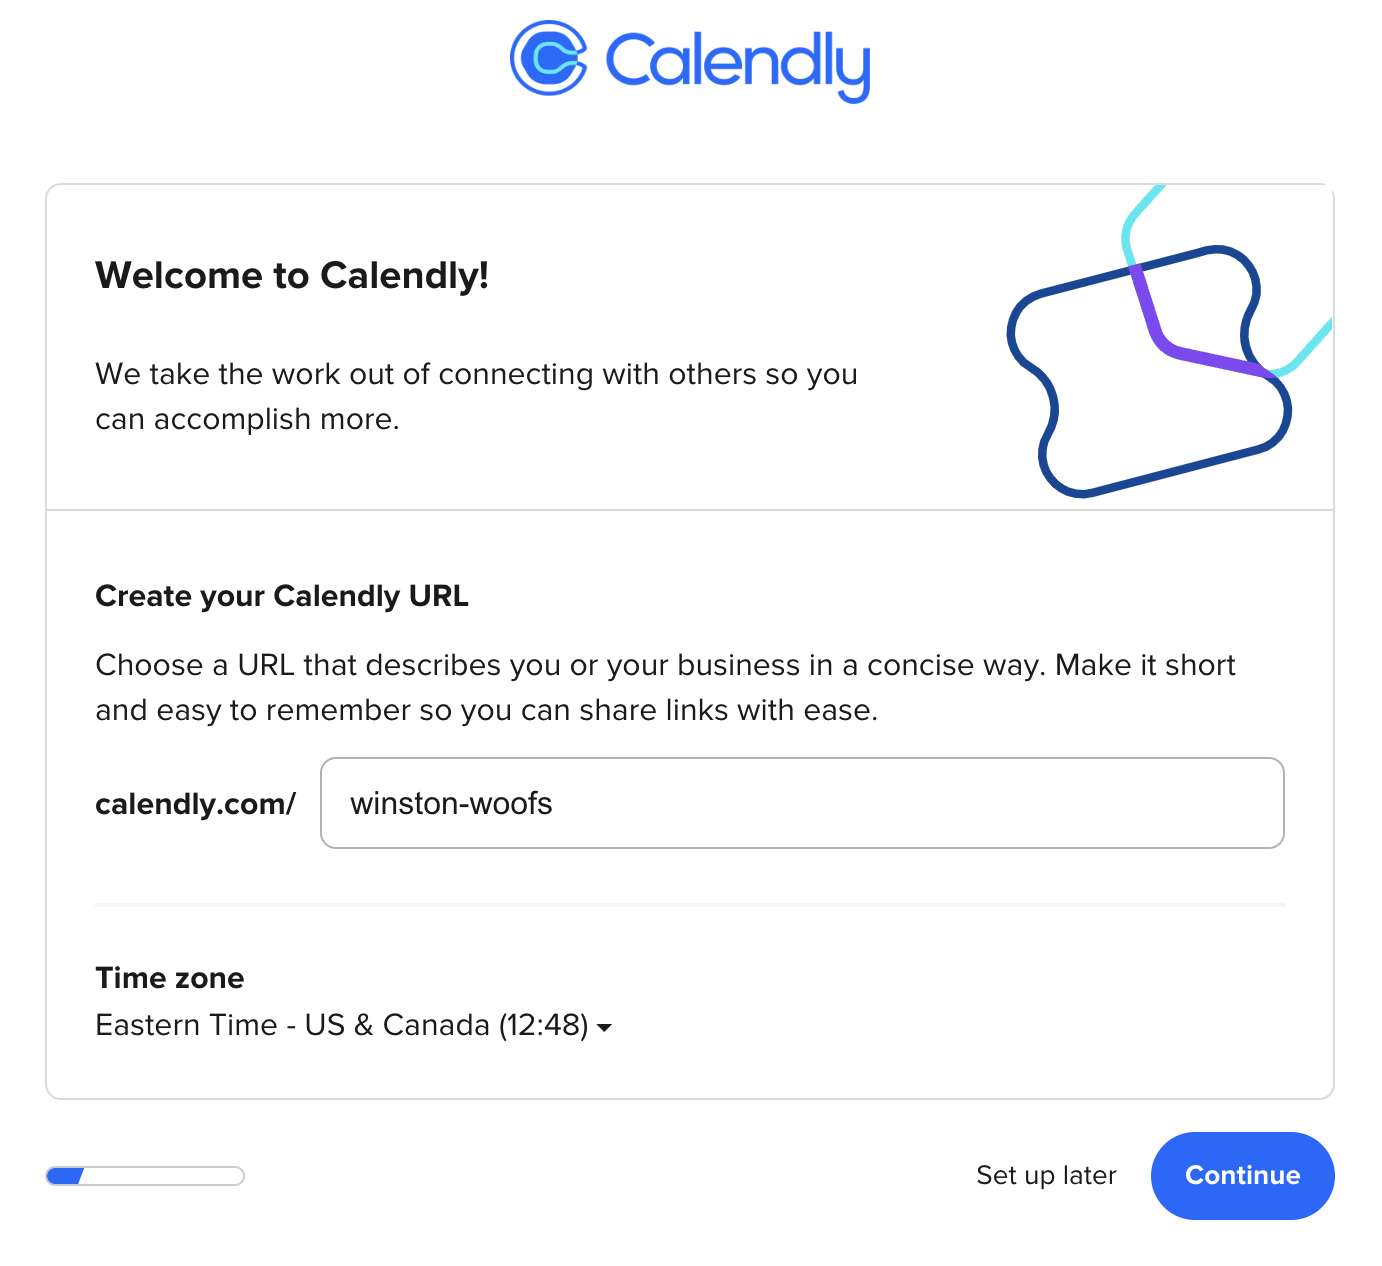 How to create your Calendly URL.